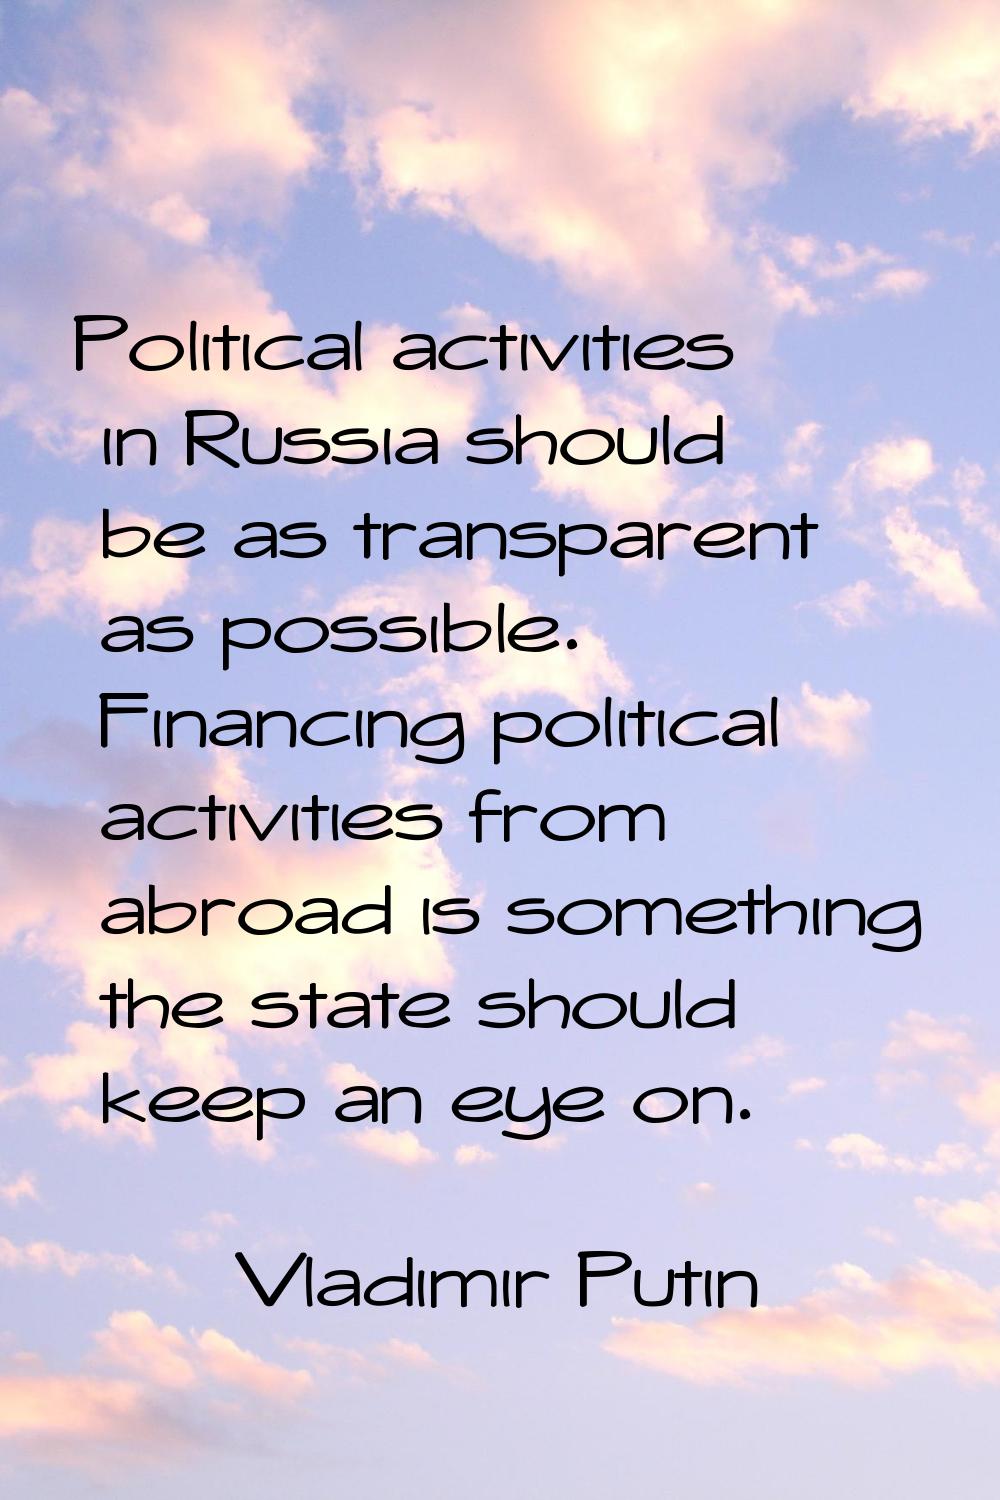 Political activities in Russia should be as transparent as possible. Financing political activities